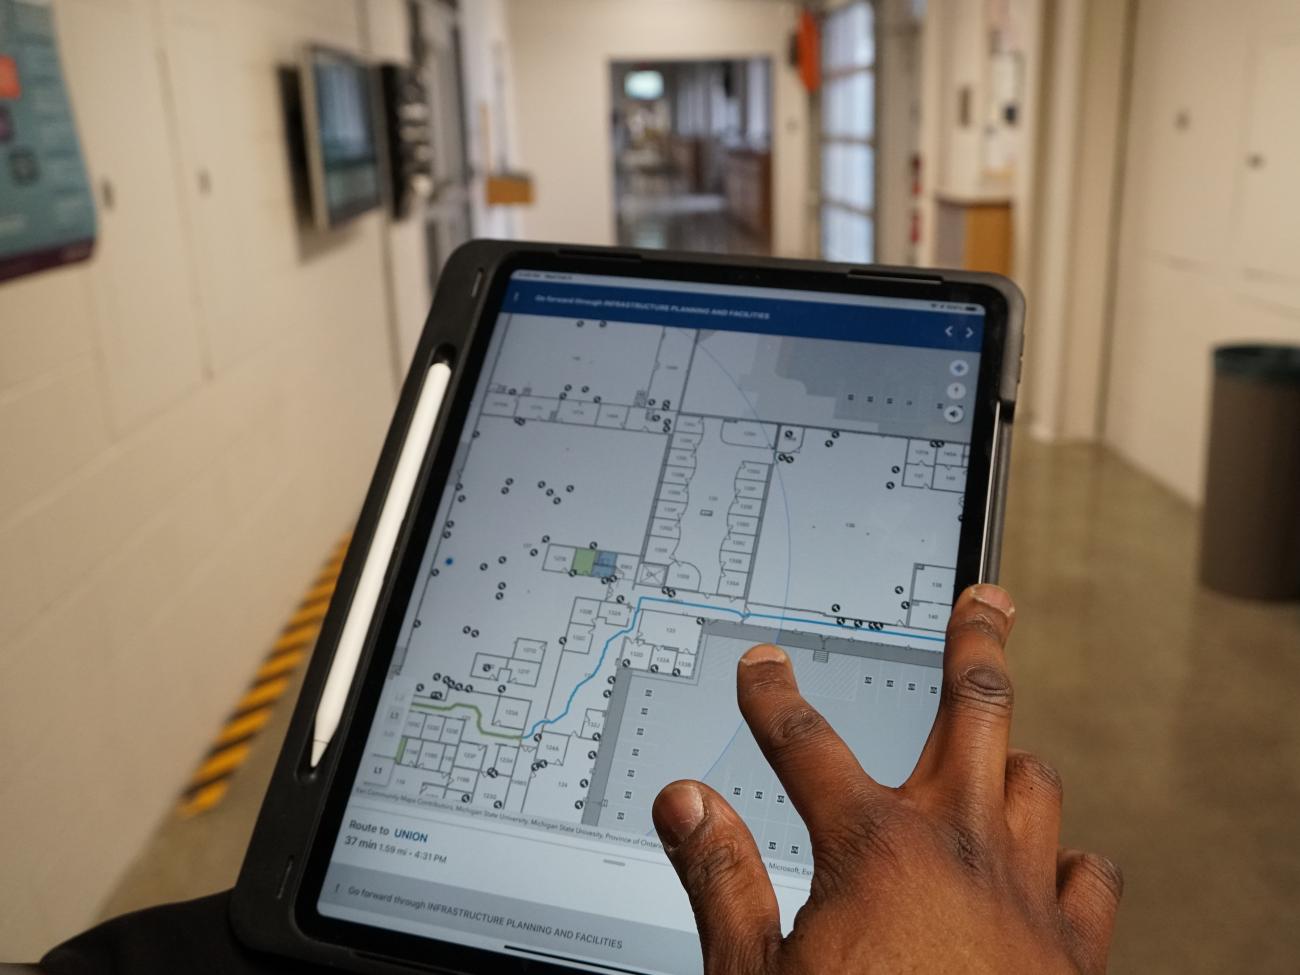 An IPF employees uses the wayfinding app.